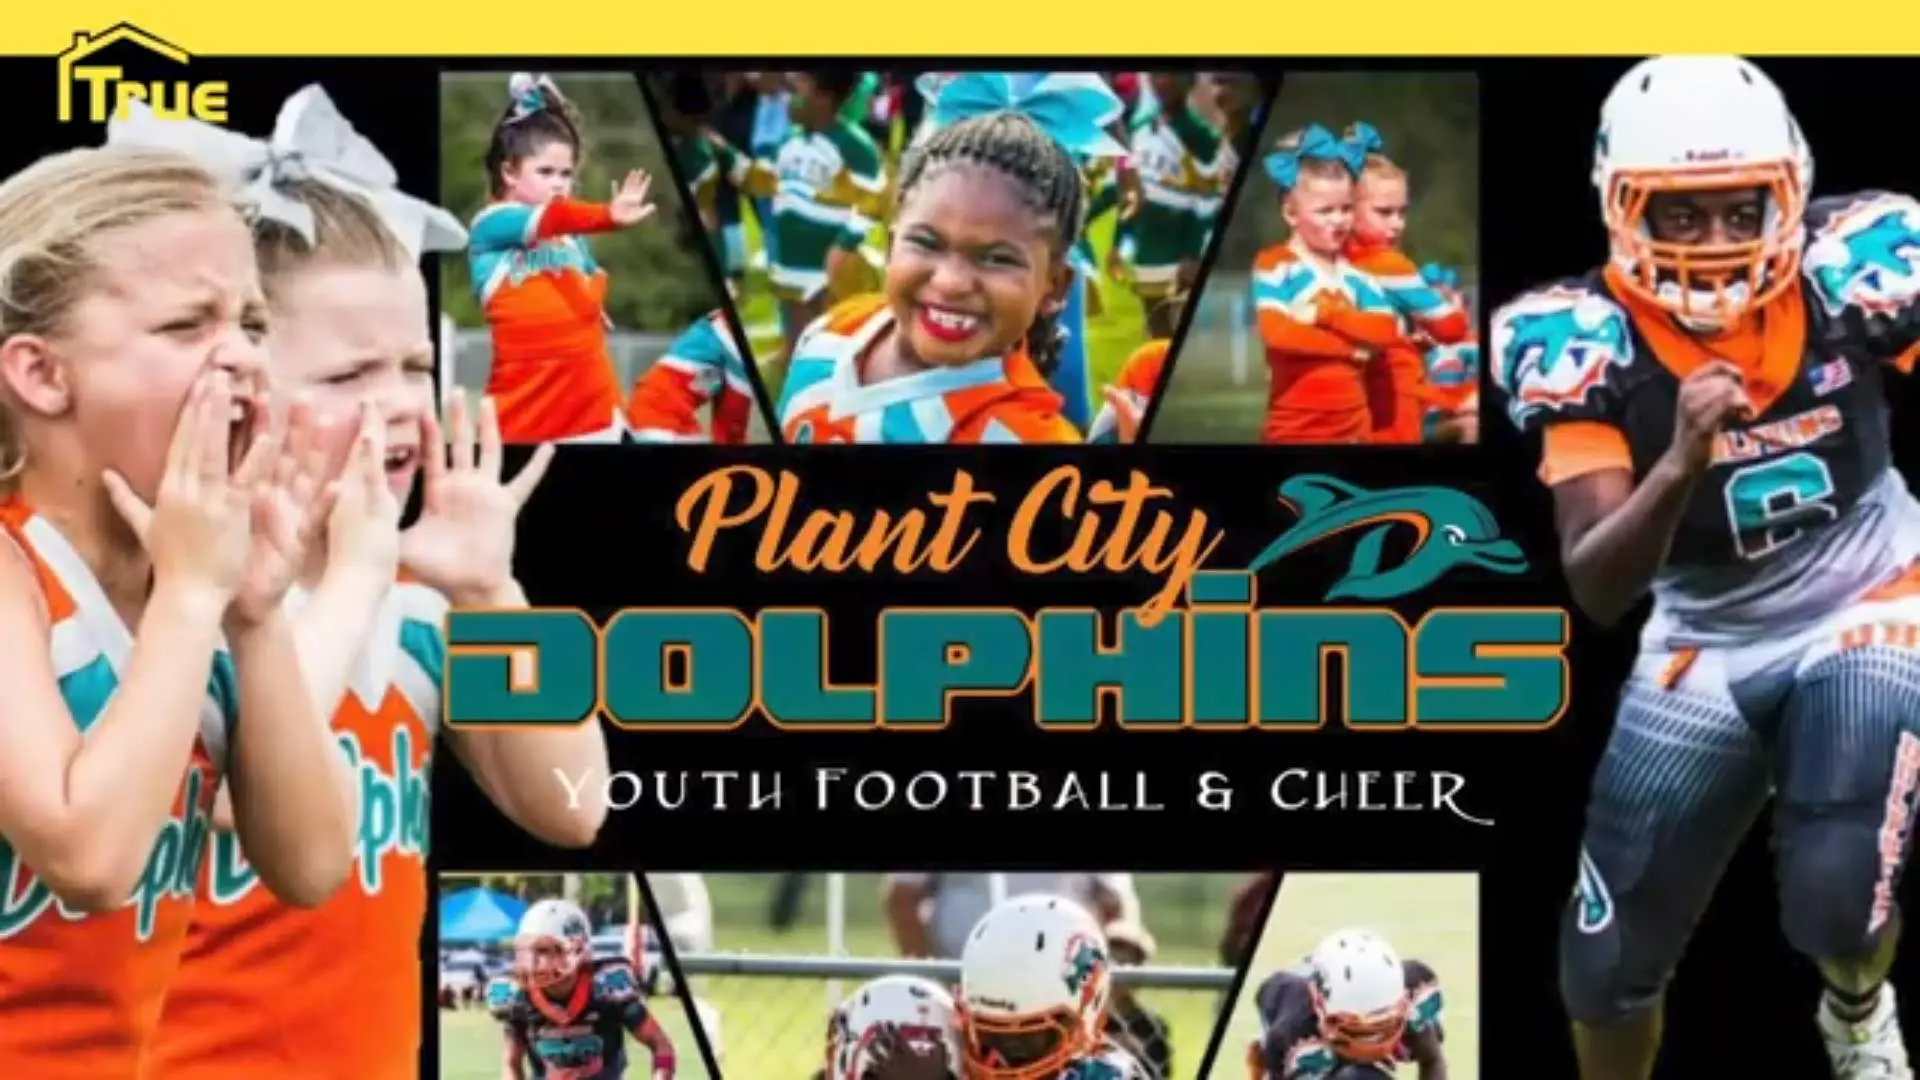 Replacing a 25 Year Old Sink for Plant City Dolphins Youth Football & Cheer Organization